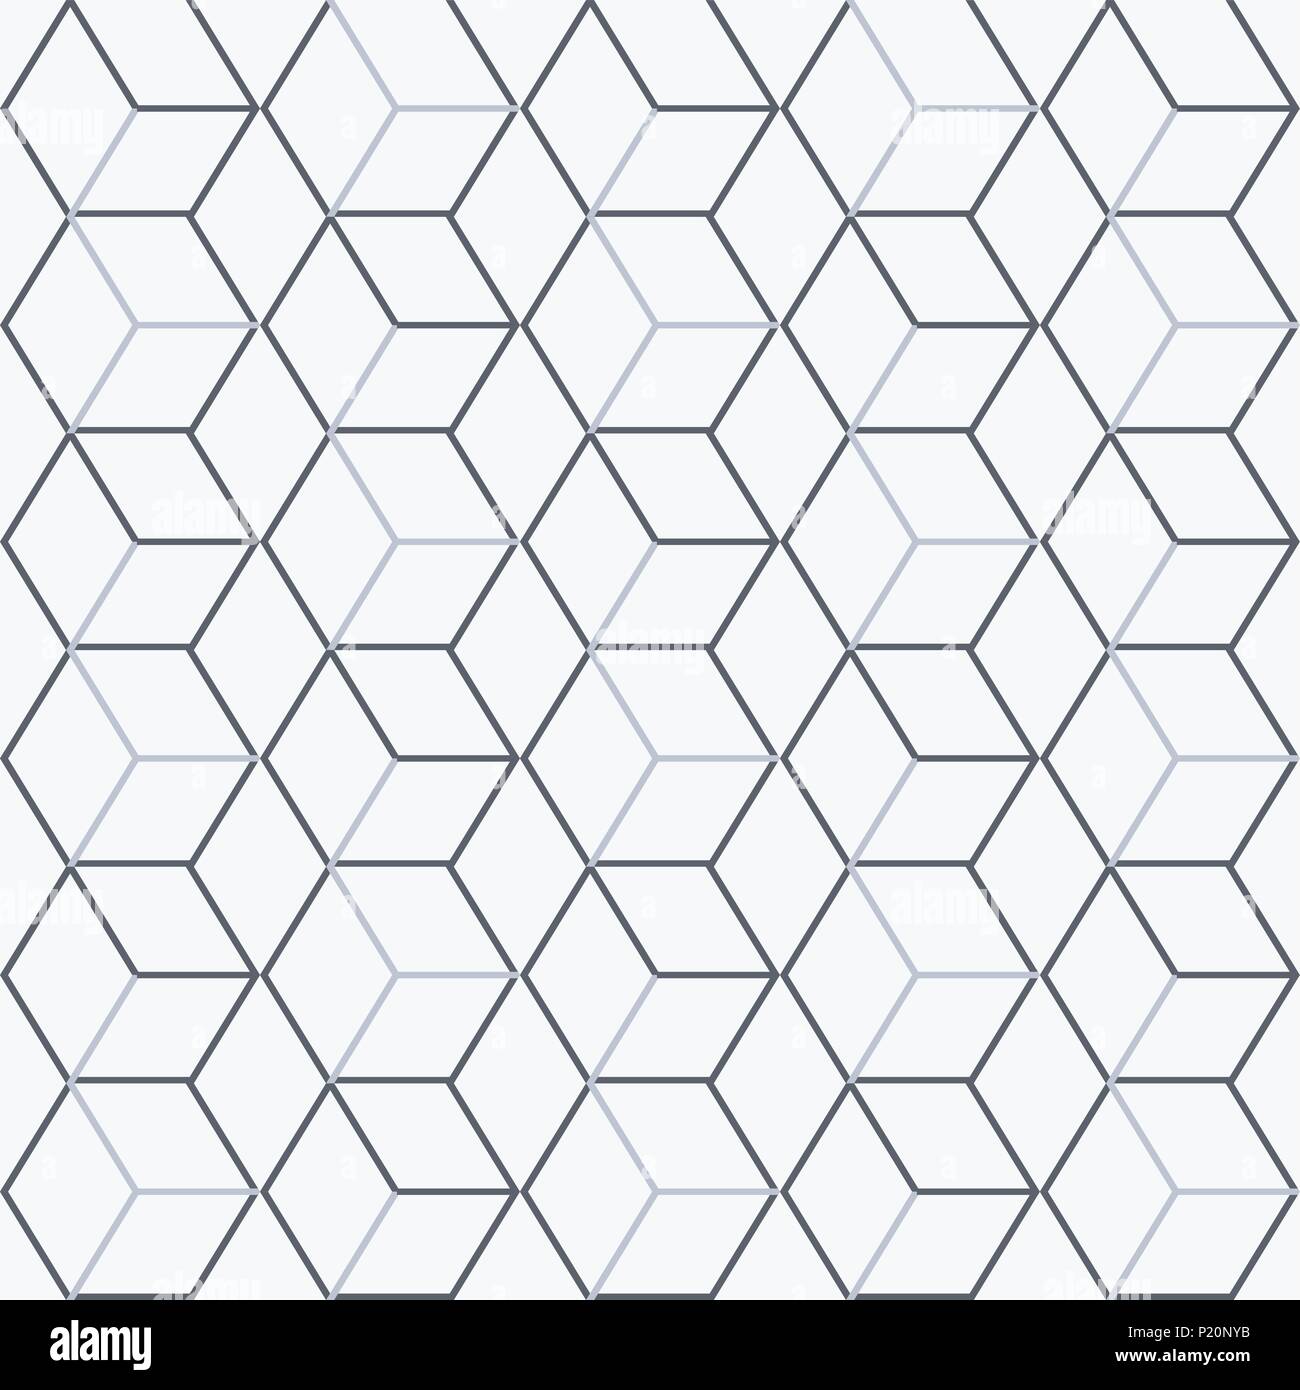 Simple minimal vector geometric abstract pattern background texture Stock Vector